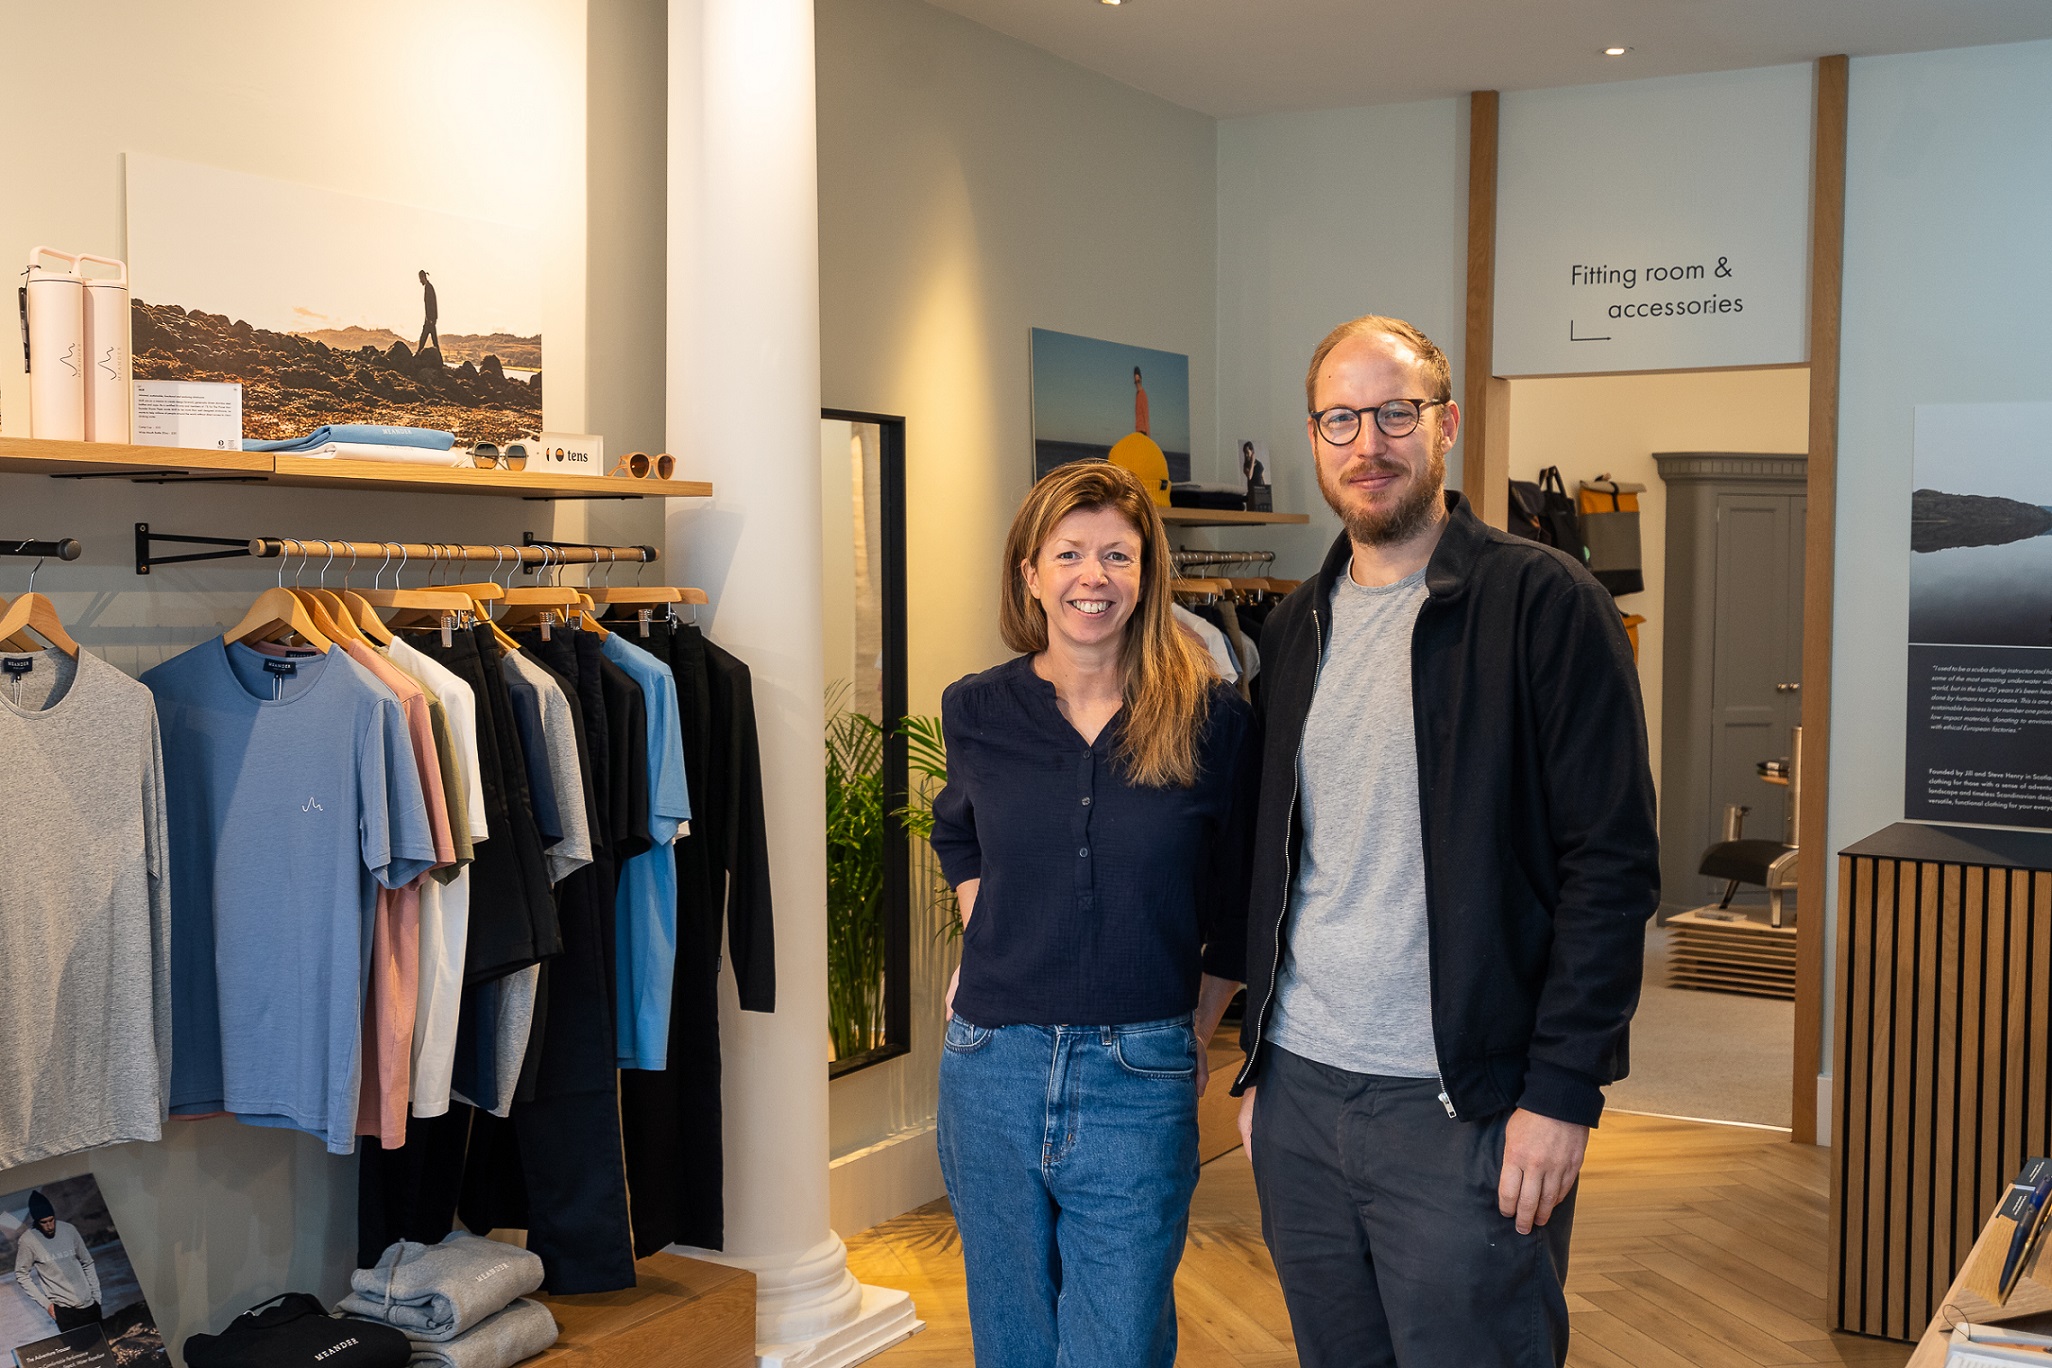 Green is the new black as sustainable clothing retailer eyes